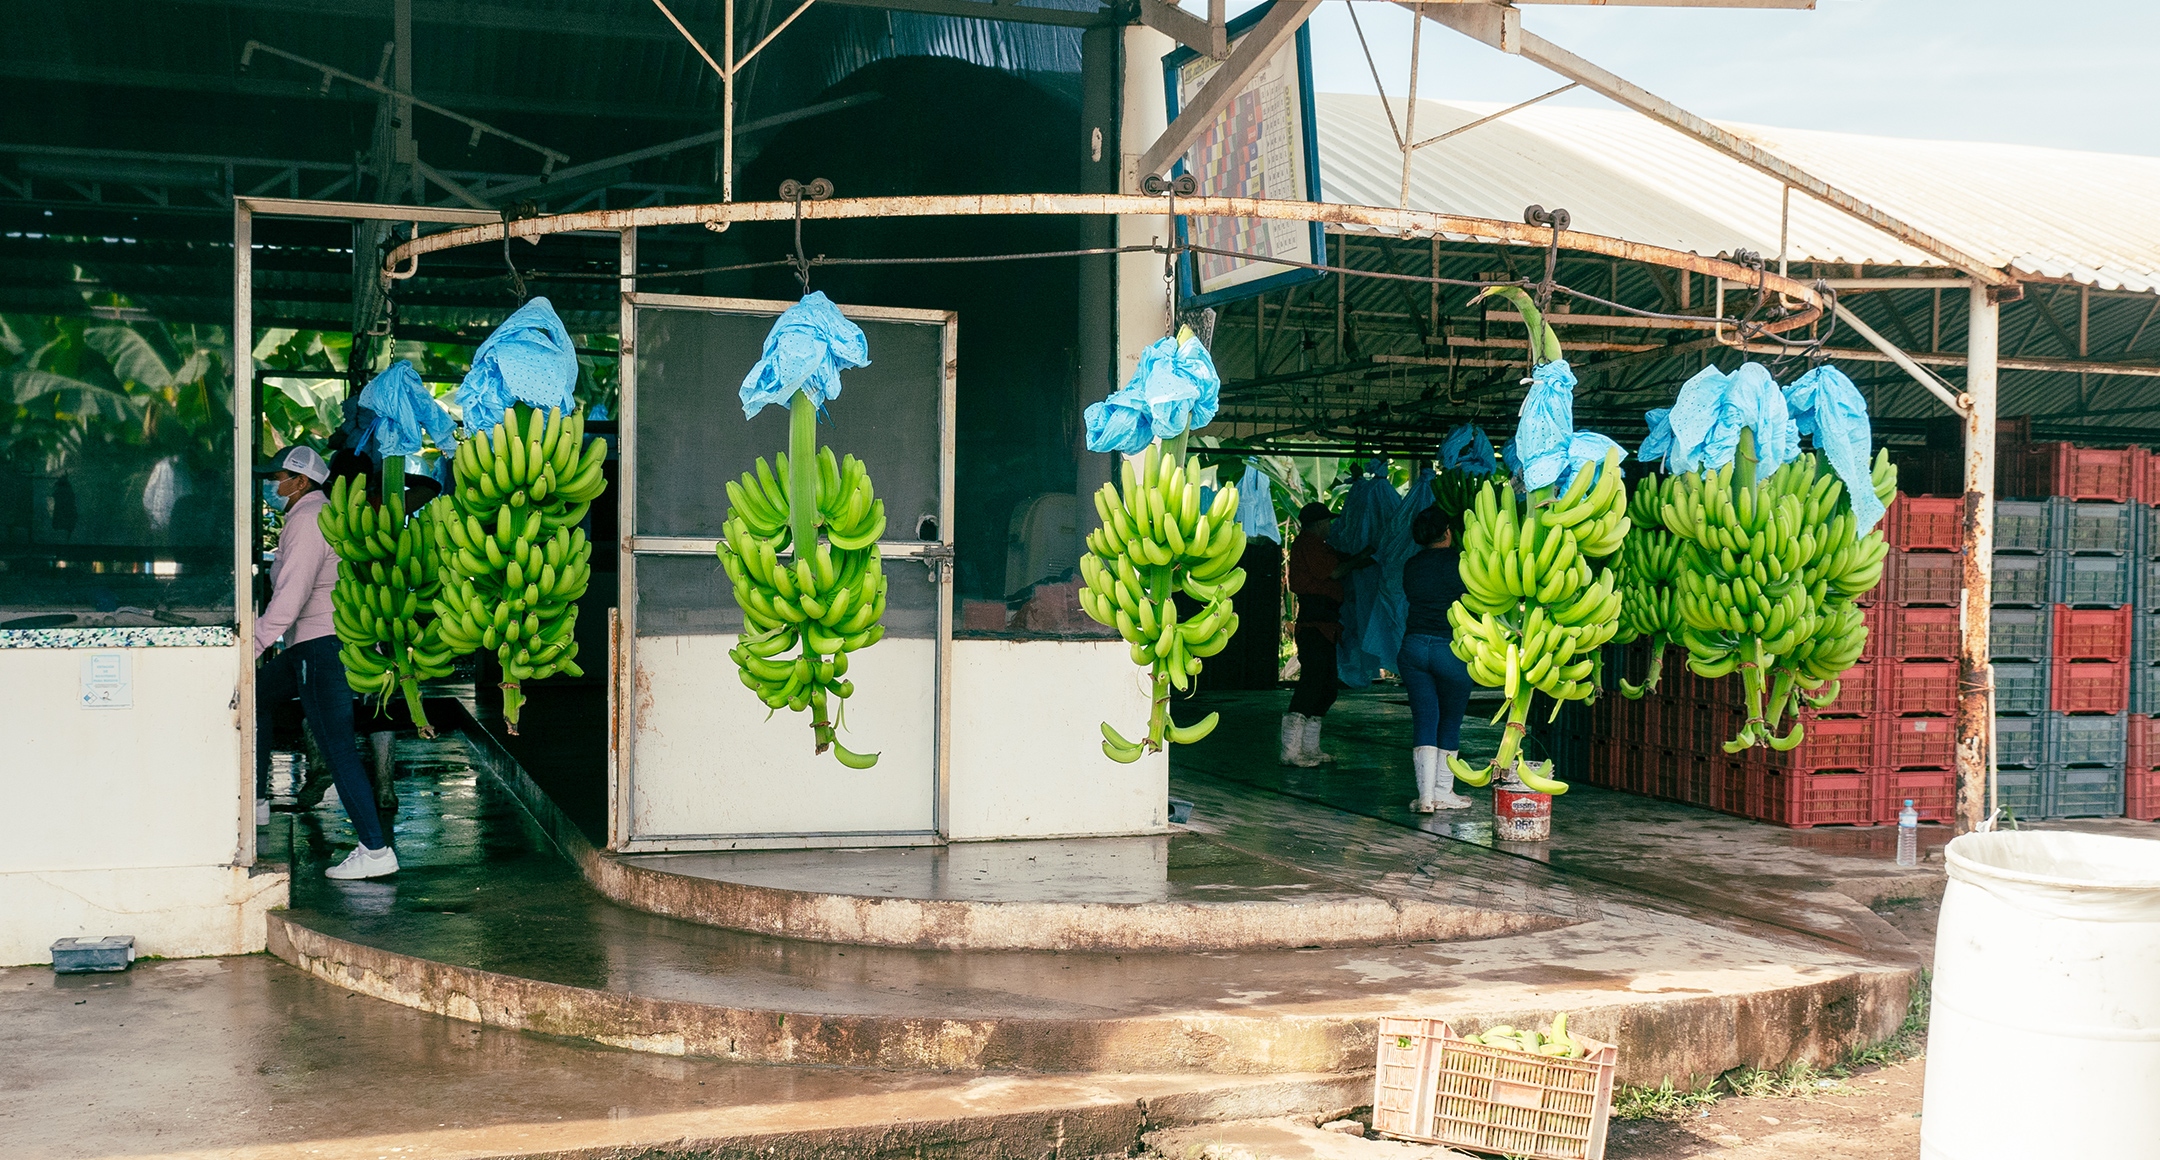 Large stalks of banana bunches being processed at an Organics Unlimited farm.